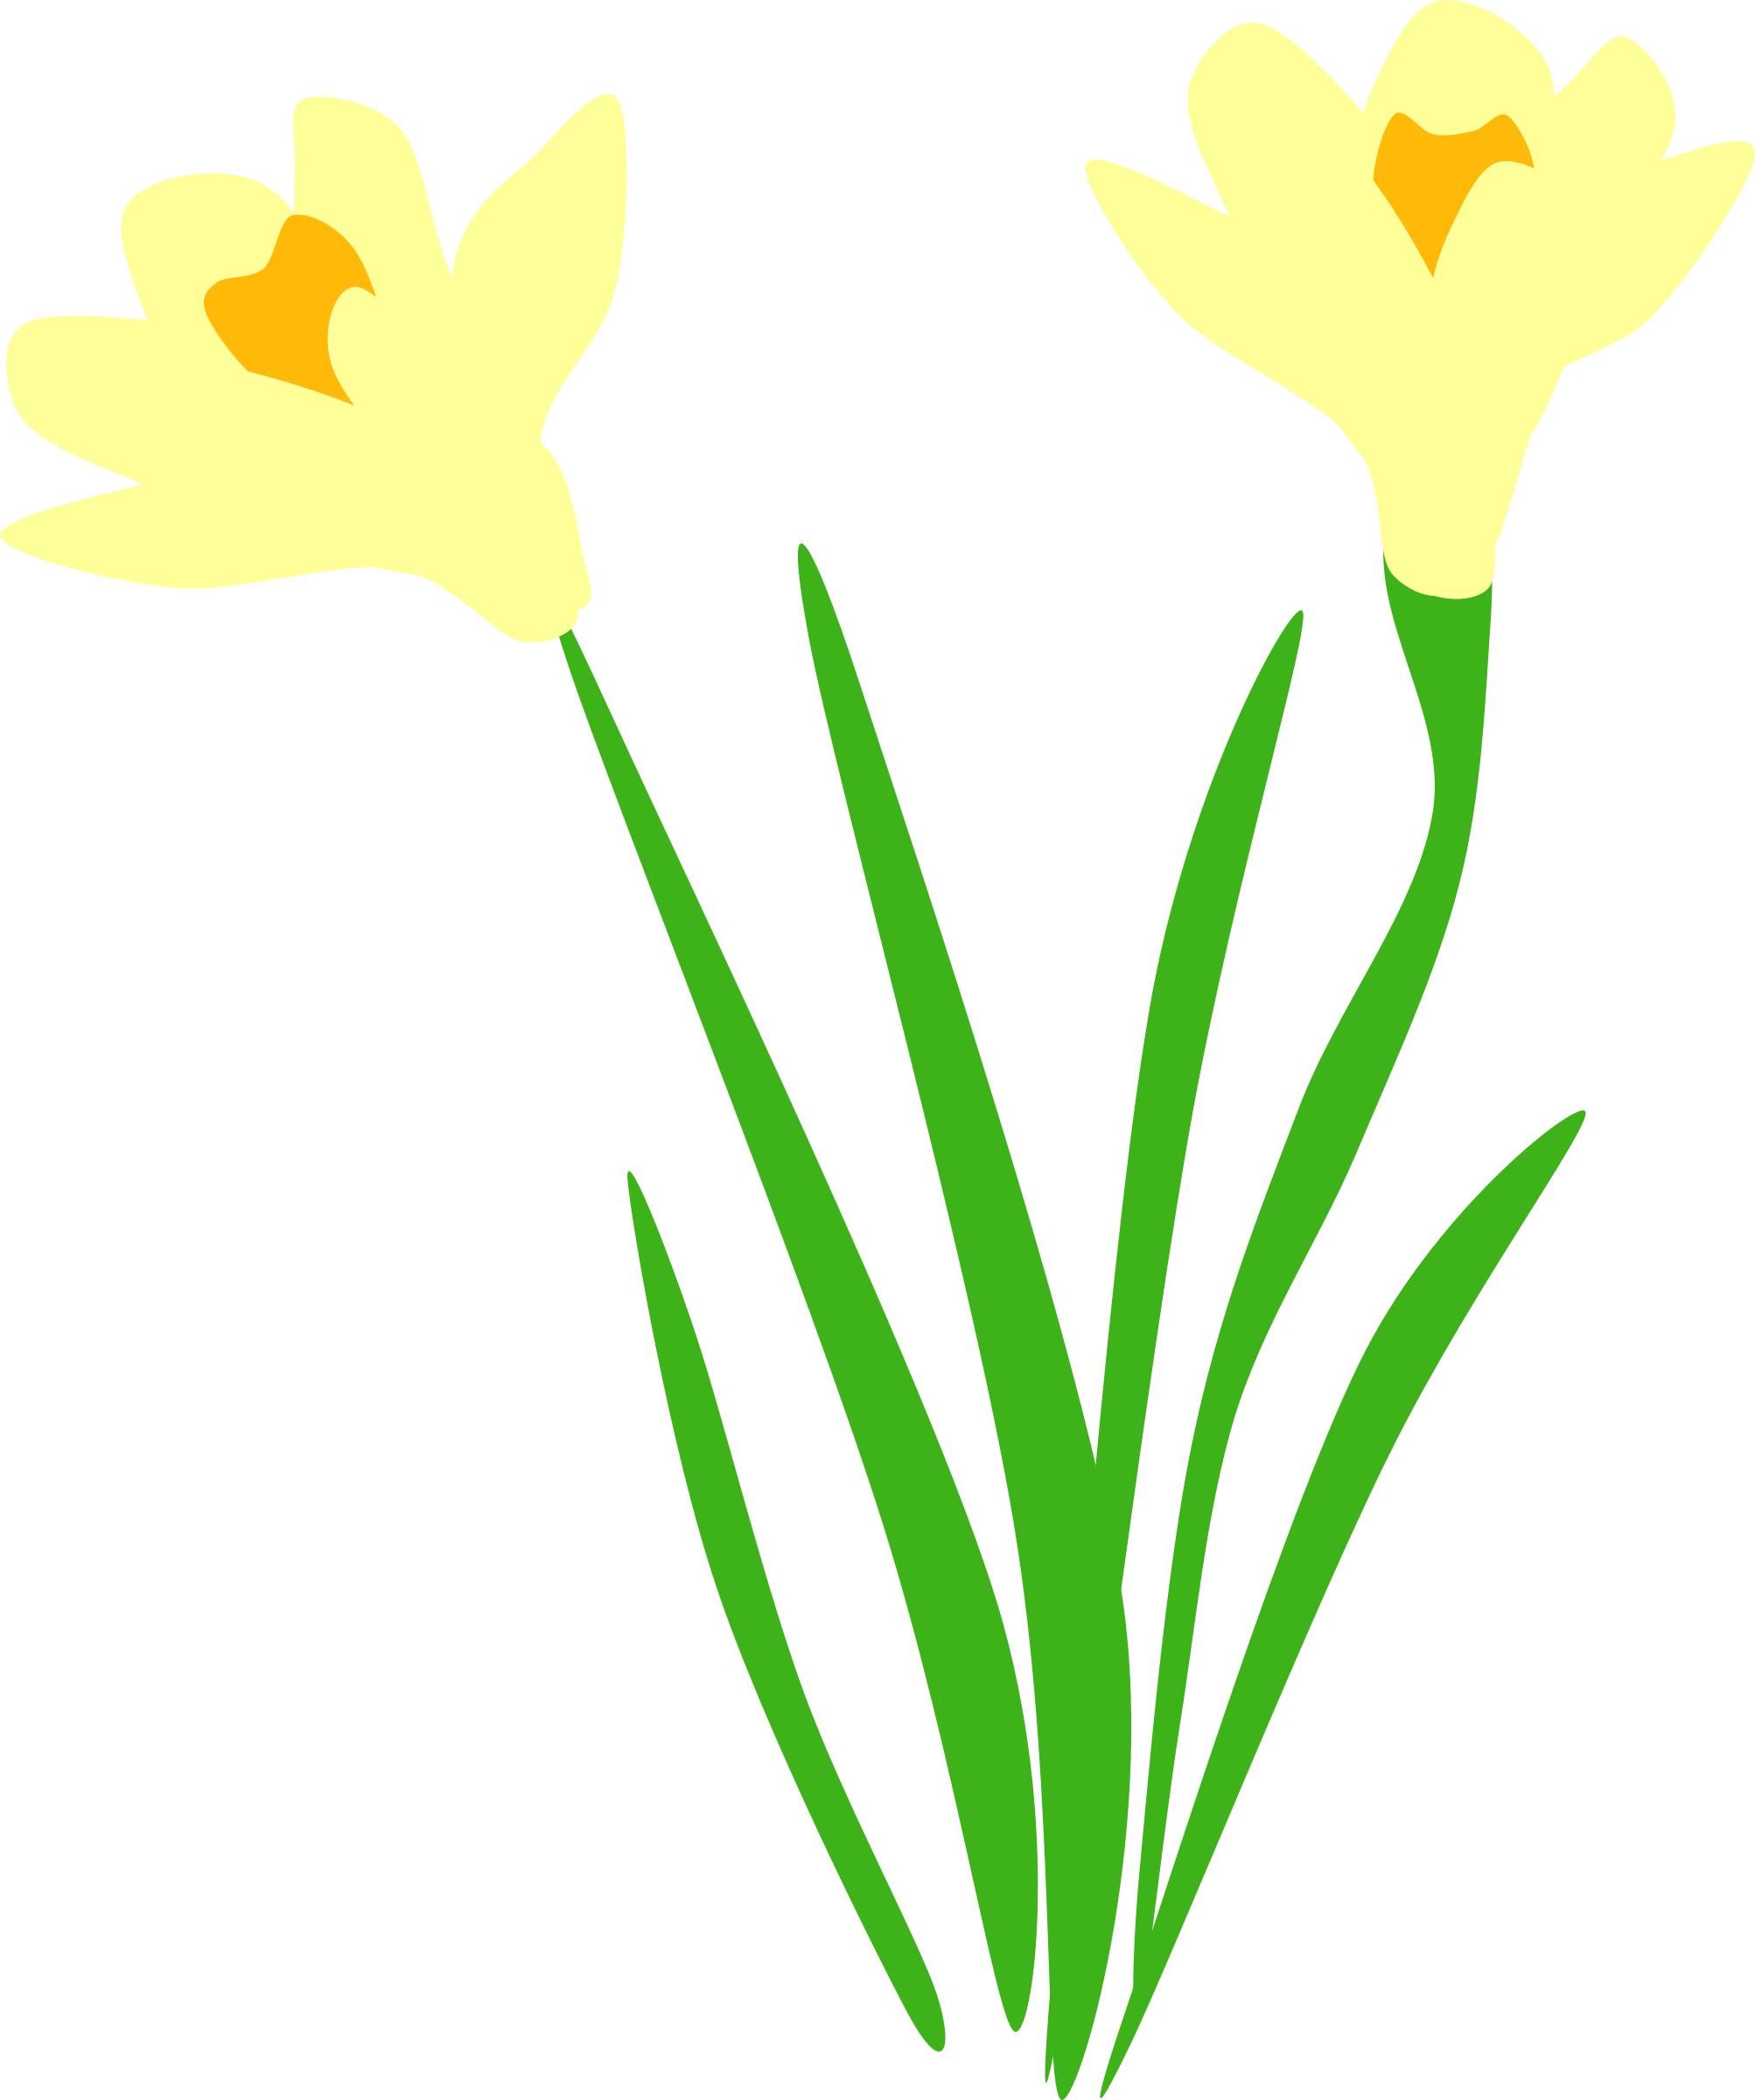 Daffodils are up! png